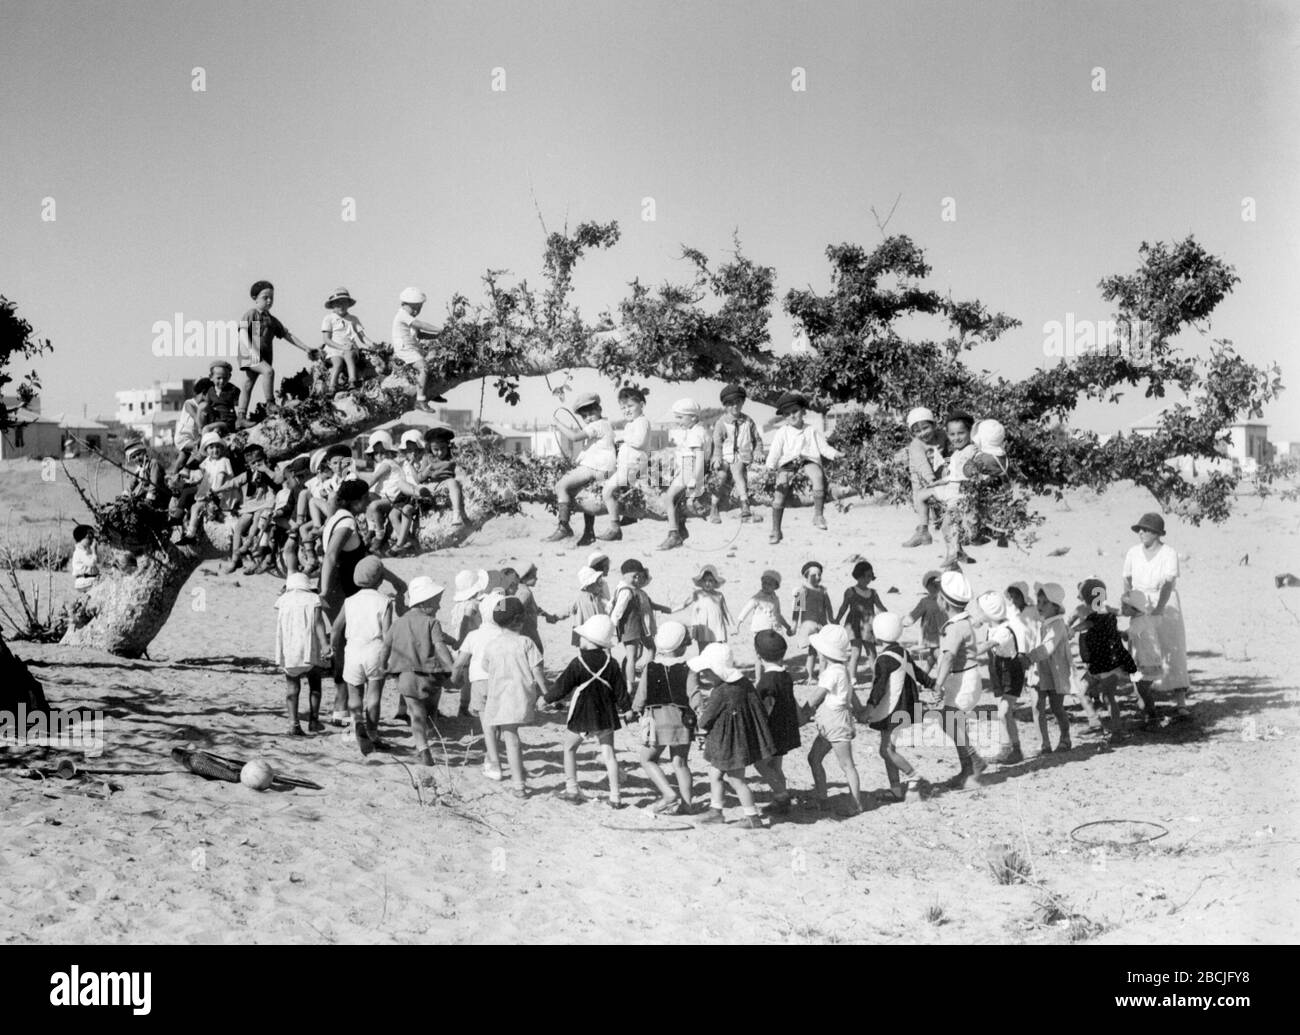 English Kindergarten Children Playing In The Sand Under An Ancient Sycamore Tree In Tel Aviv O U I O I U U C O Ss O U E O I U U O U C Ss U I E U E E O E 01 06 1933 This Is Available From National